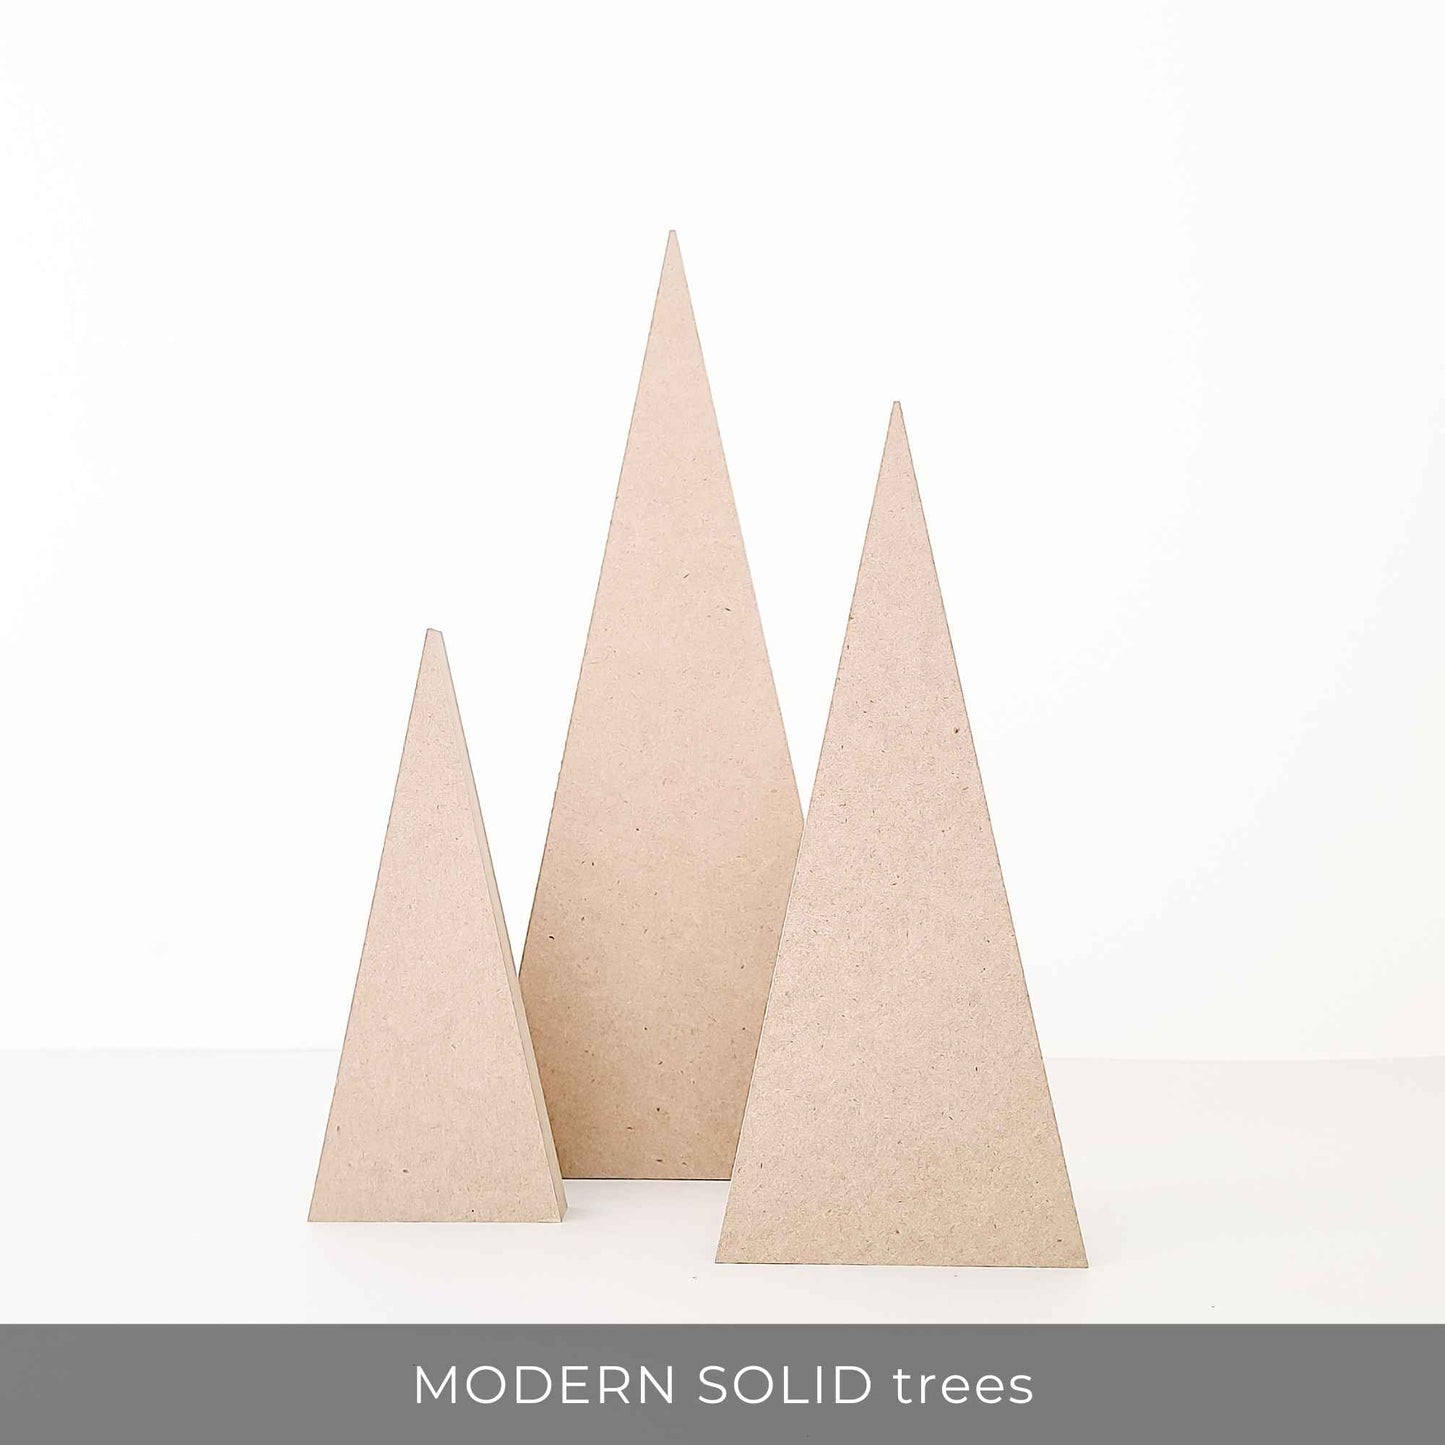 Modern solid wooden trees for Christmas decor or baby boy nursery decor